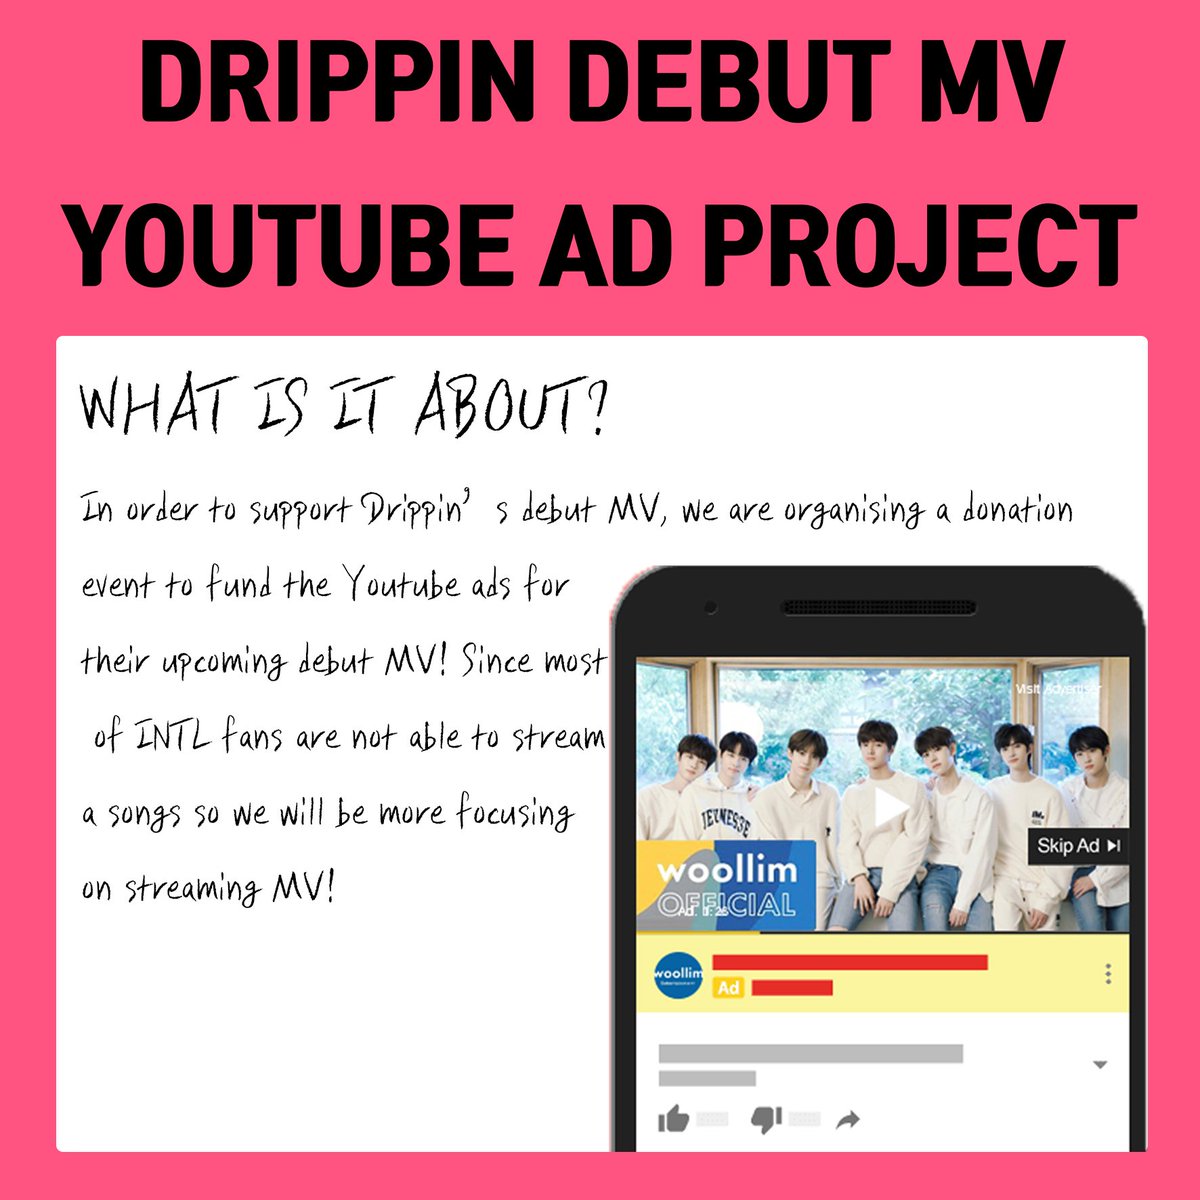 In order to succesfully  #DRIPPIN debut MV youtube ads project.All fundrasing for youtube ads now we're collaborate it with  @tomyonly_dy. For everyone who fund donation, will get new gift as write on new details posterNew form link   https://docs.google.com/forms/d/e/1FAIpQLSdI56k_fVwAA8HvgJ2UAusNiAkEwqd_imfgFfos4ombX6h_EA/viewform  #드리핀  @drippin